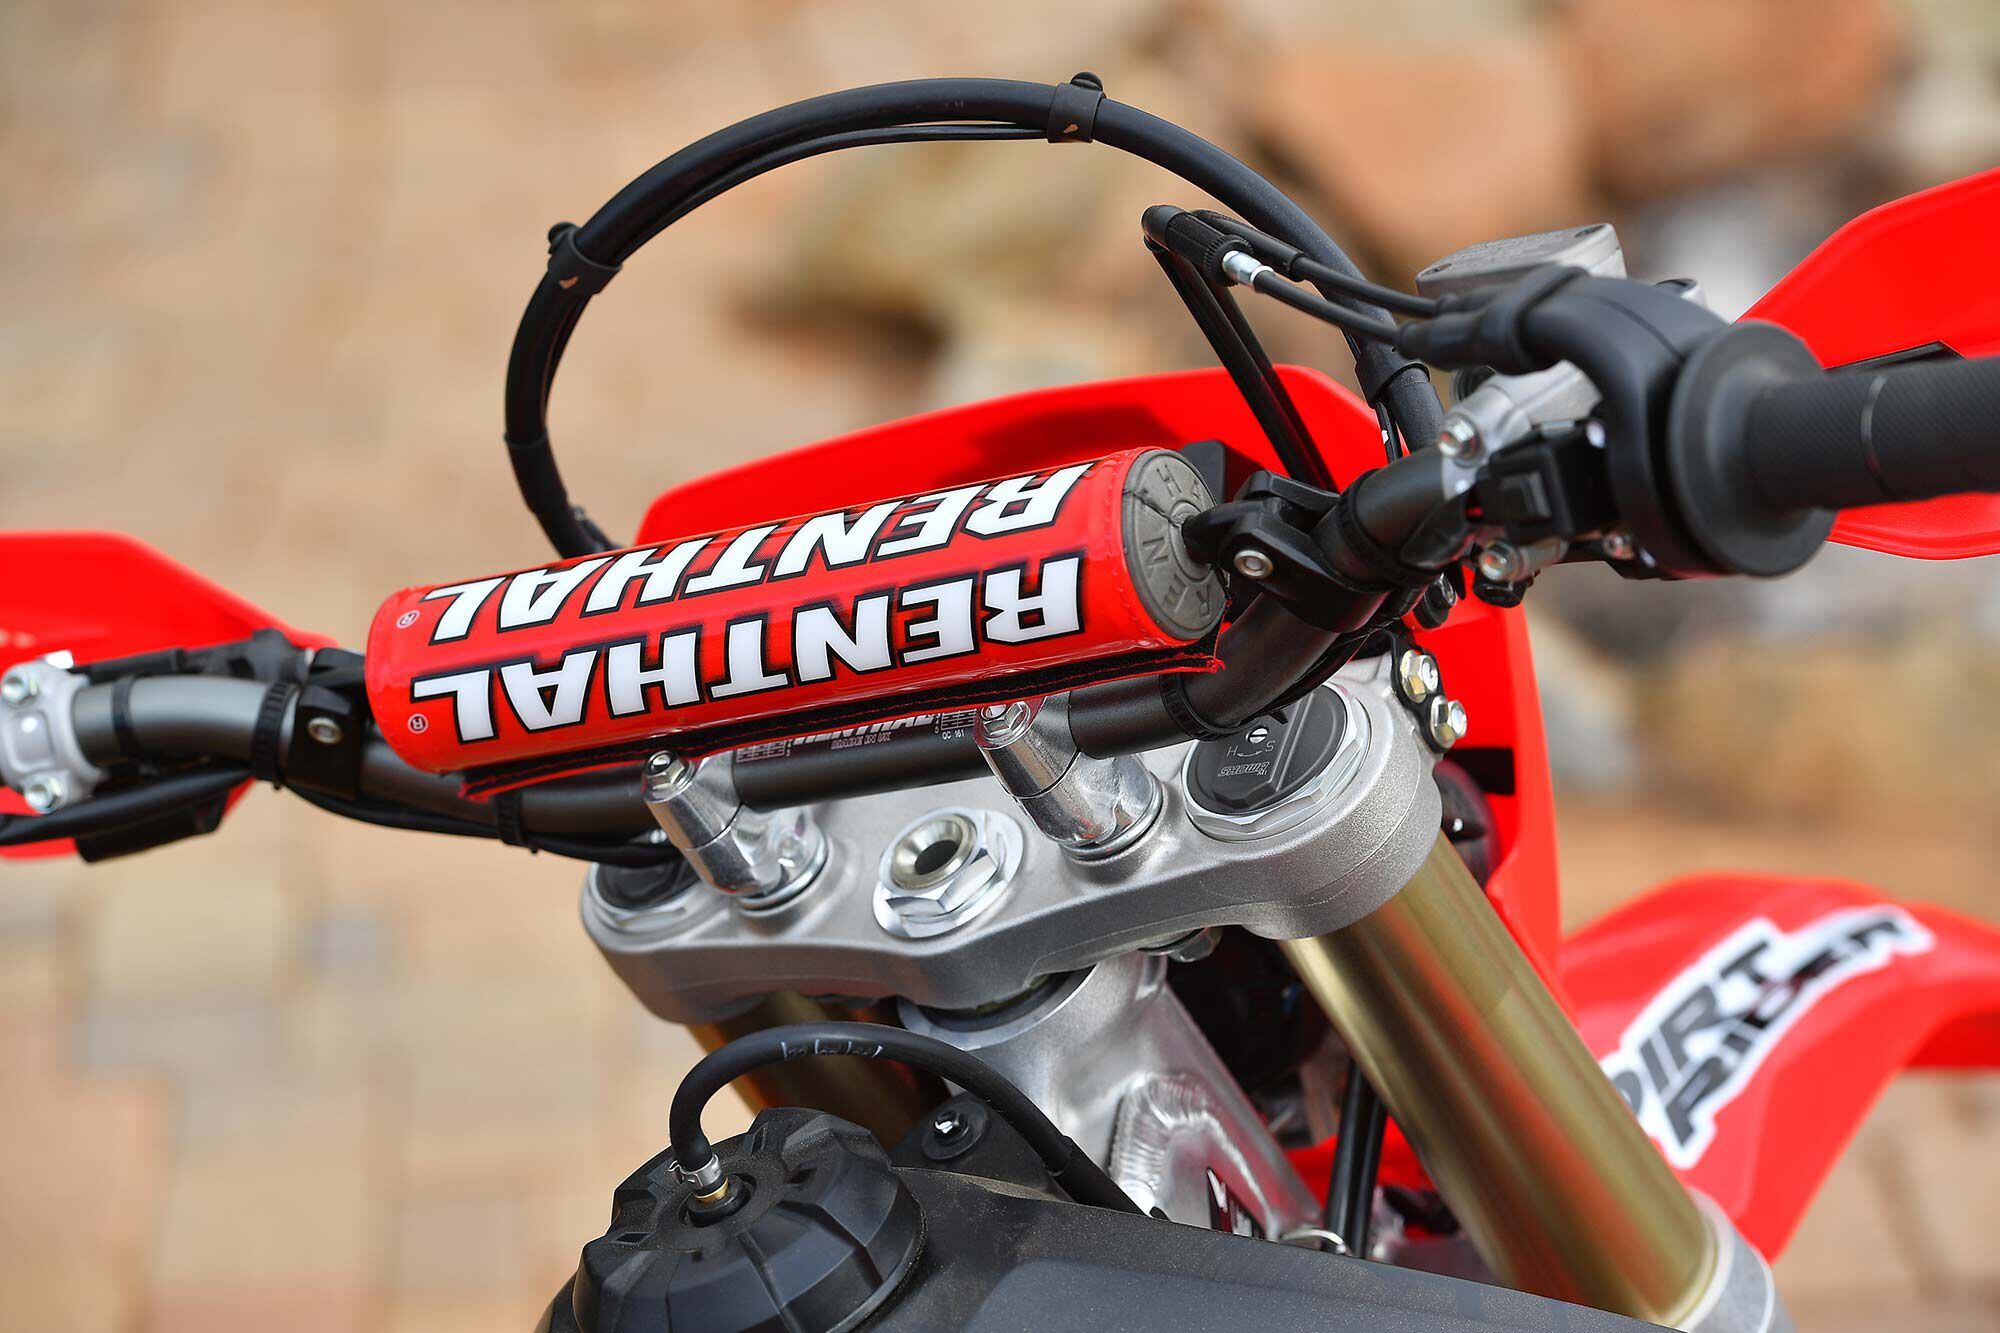 Renthal’s 7/8-inch-diameter handlebar graces the CRF450X. The 971-bend was a Honda staple for years, so Red Riders will feel right at home. Note the standard fork height placement (flush) with extended front brake line and speedo cable tied together.